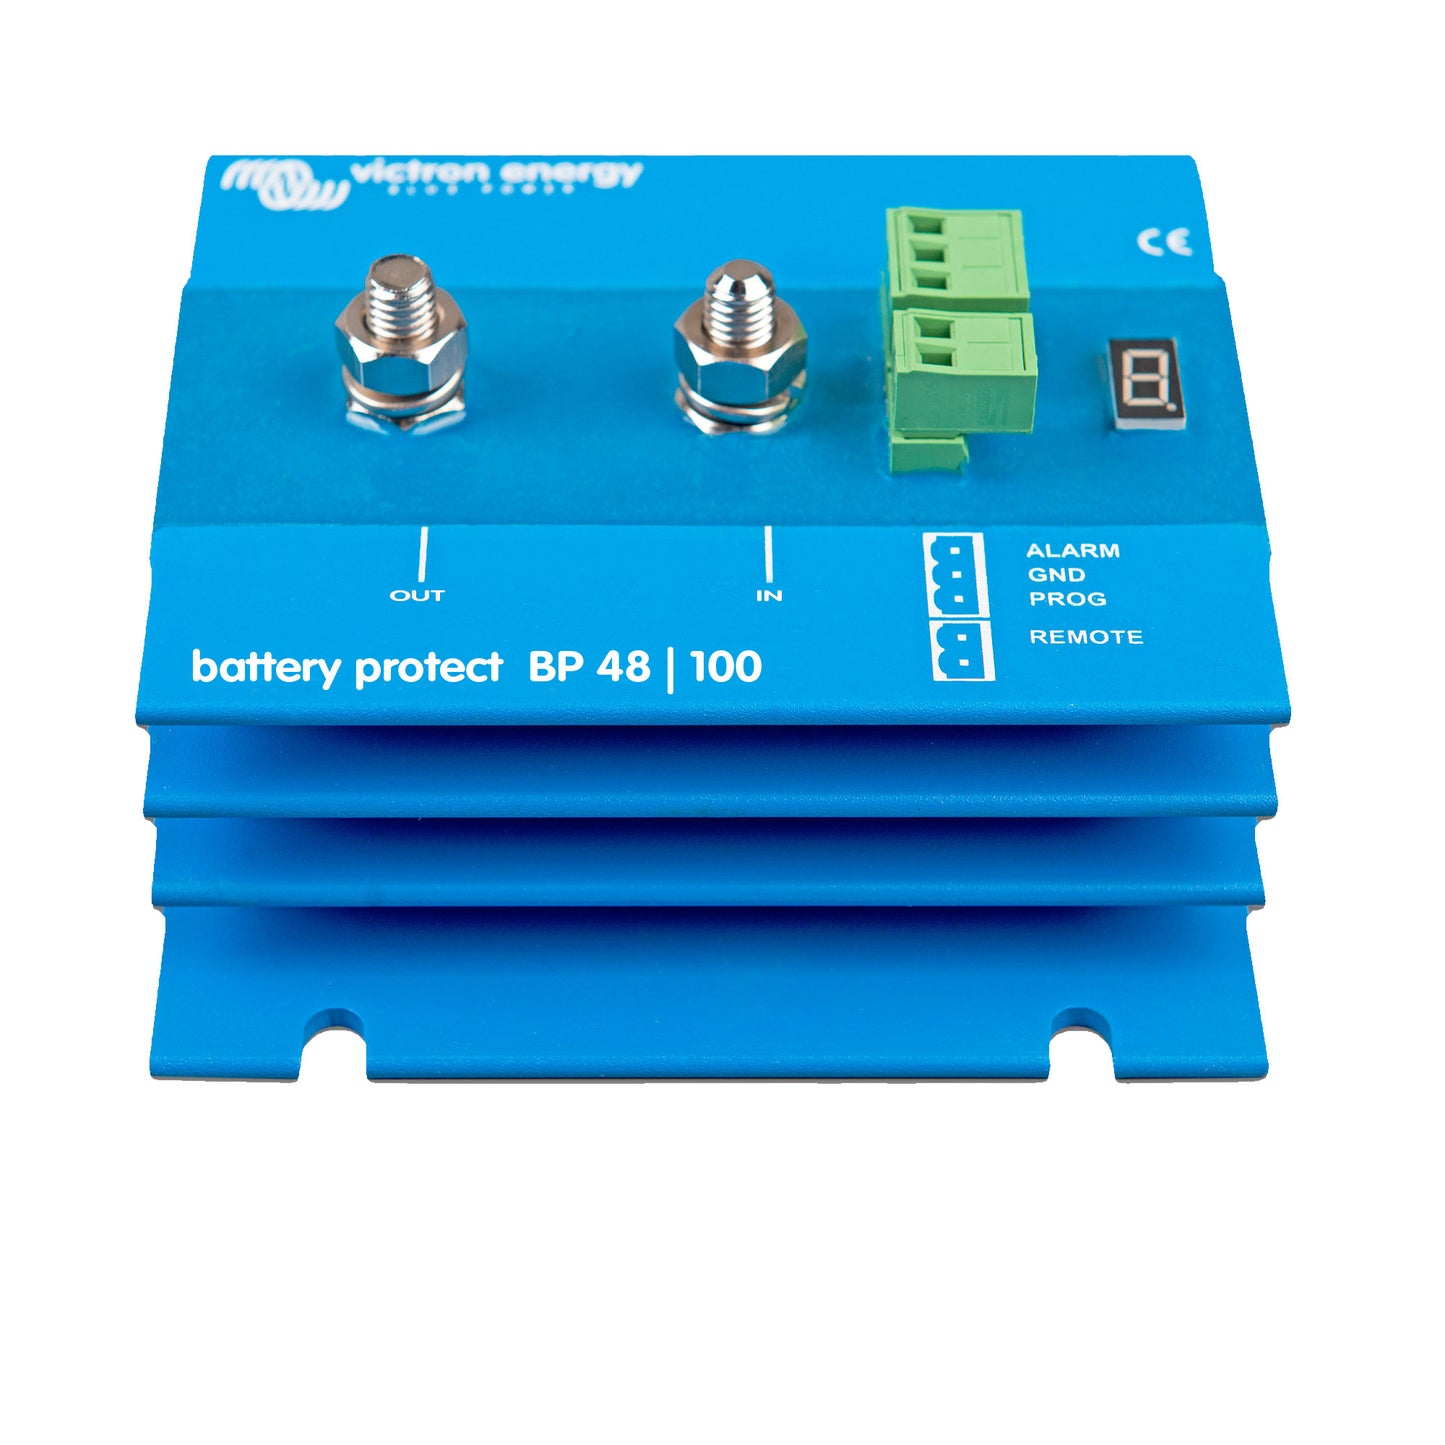 Battery Protect 48V/100A (BP-48/100)